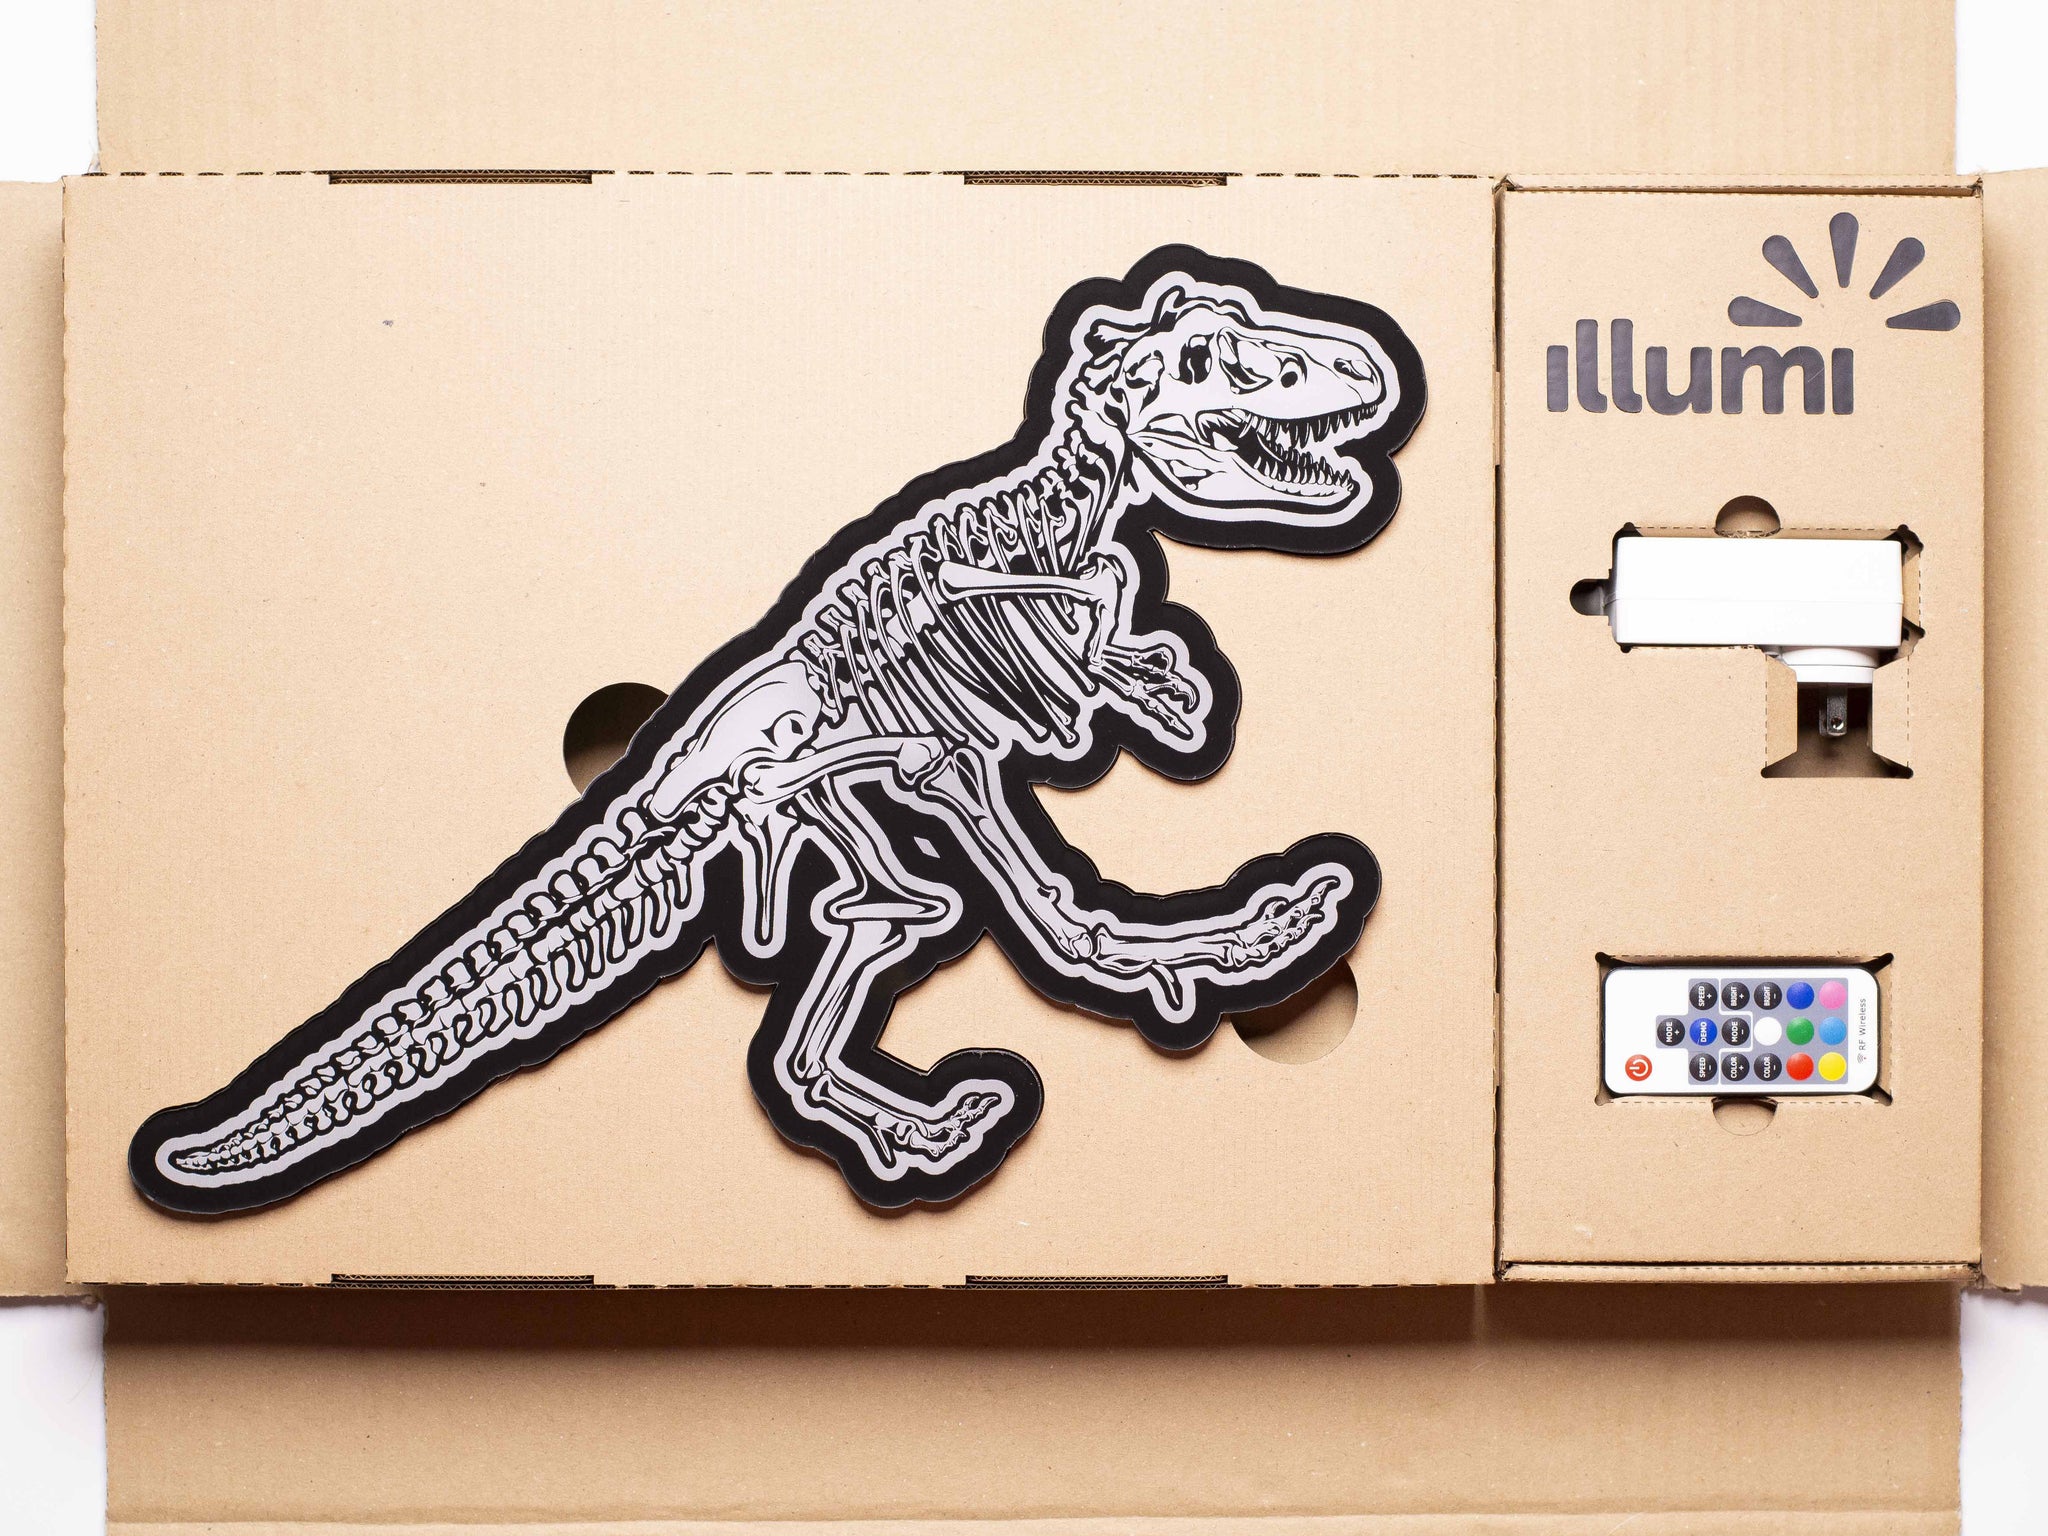 a stop motion product unboxing video of a 3d wall mounted acrylic light, backlit by multicolor led lights, featuring an epic dinosaur themed illustration of a t-rex skeleton.